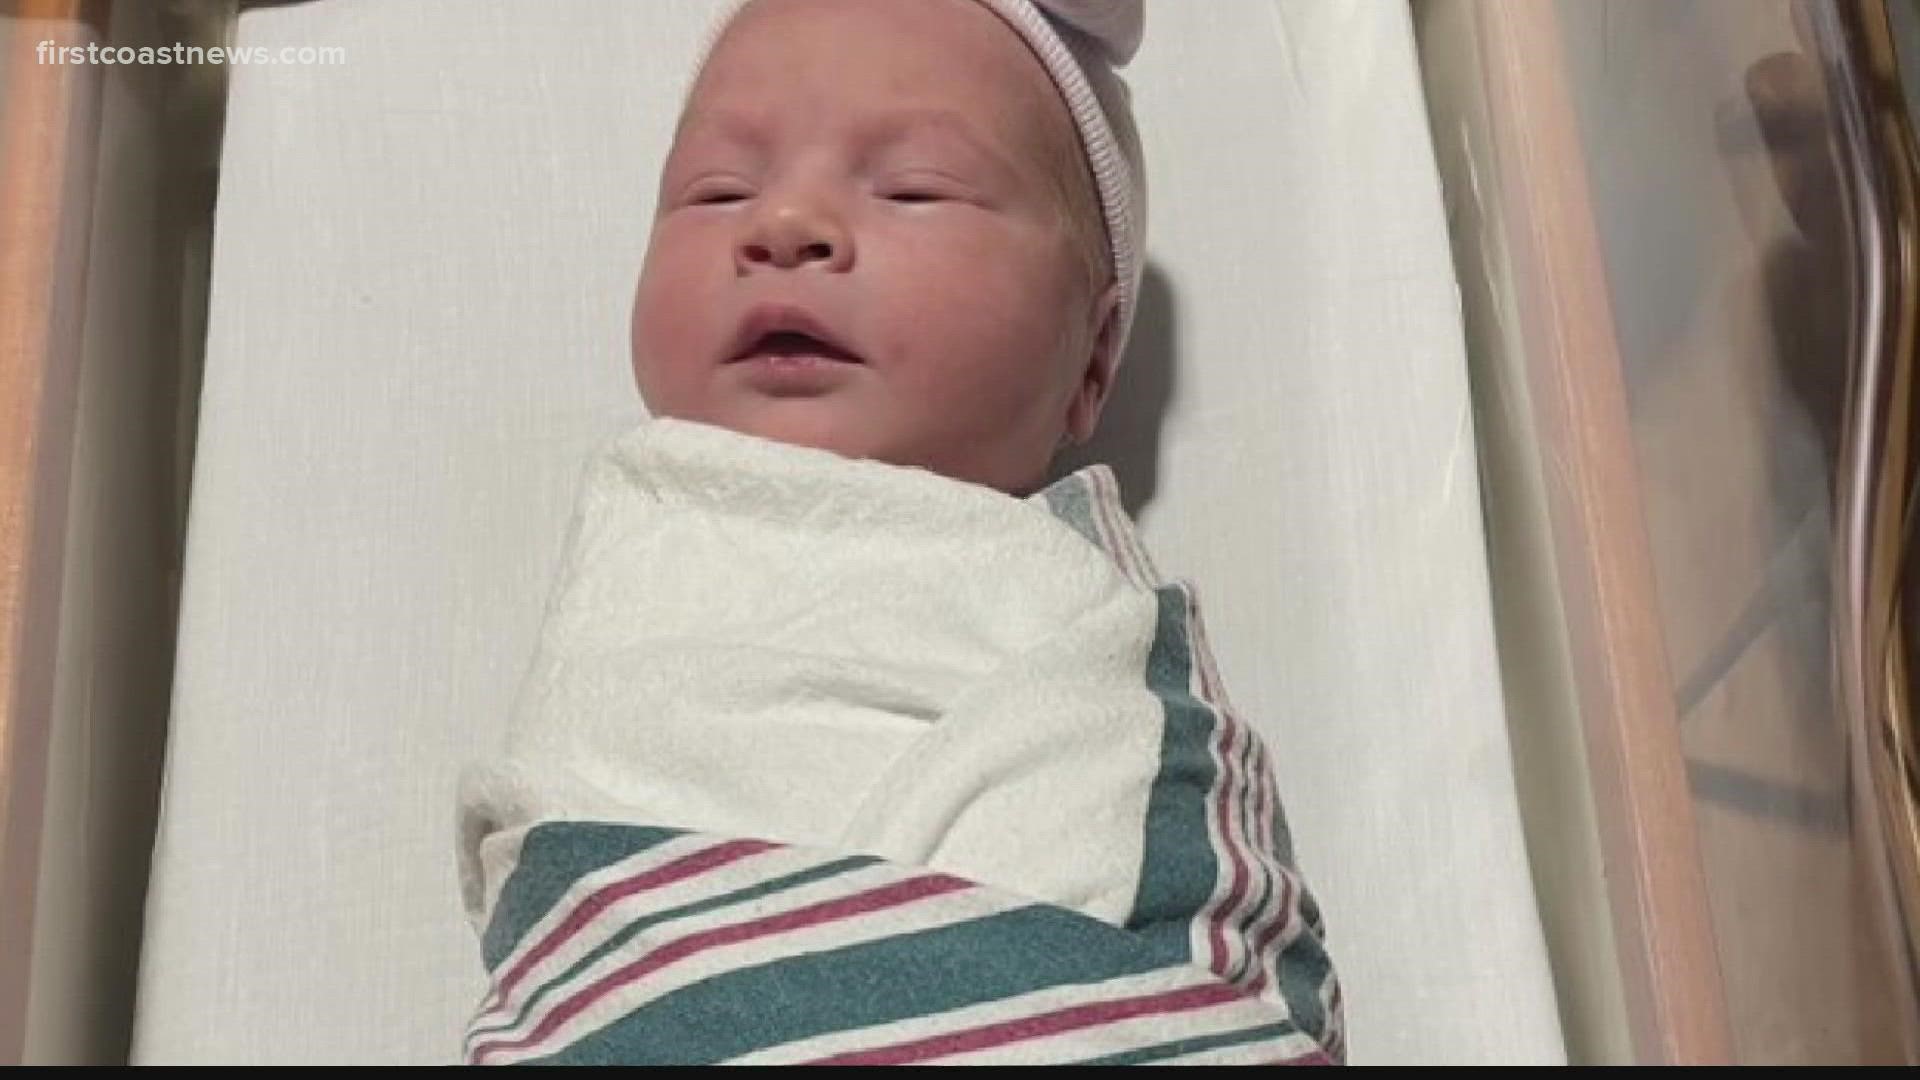 Instead of the annual golf and pre-gaming on Florida Georgia Friday, Tony and his Mary were in the hospital welcoming baby Kate into the world.